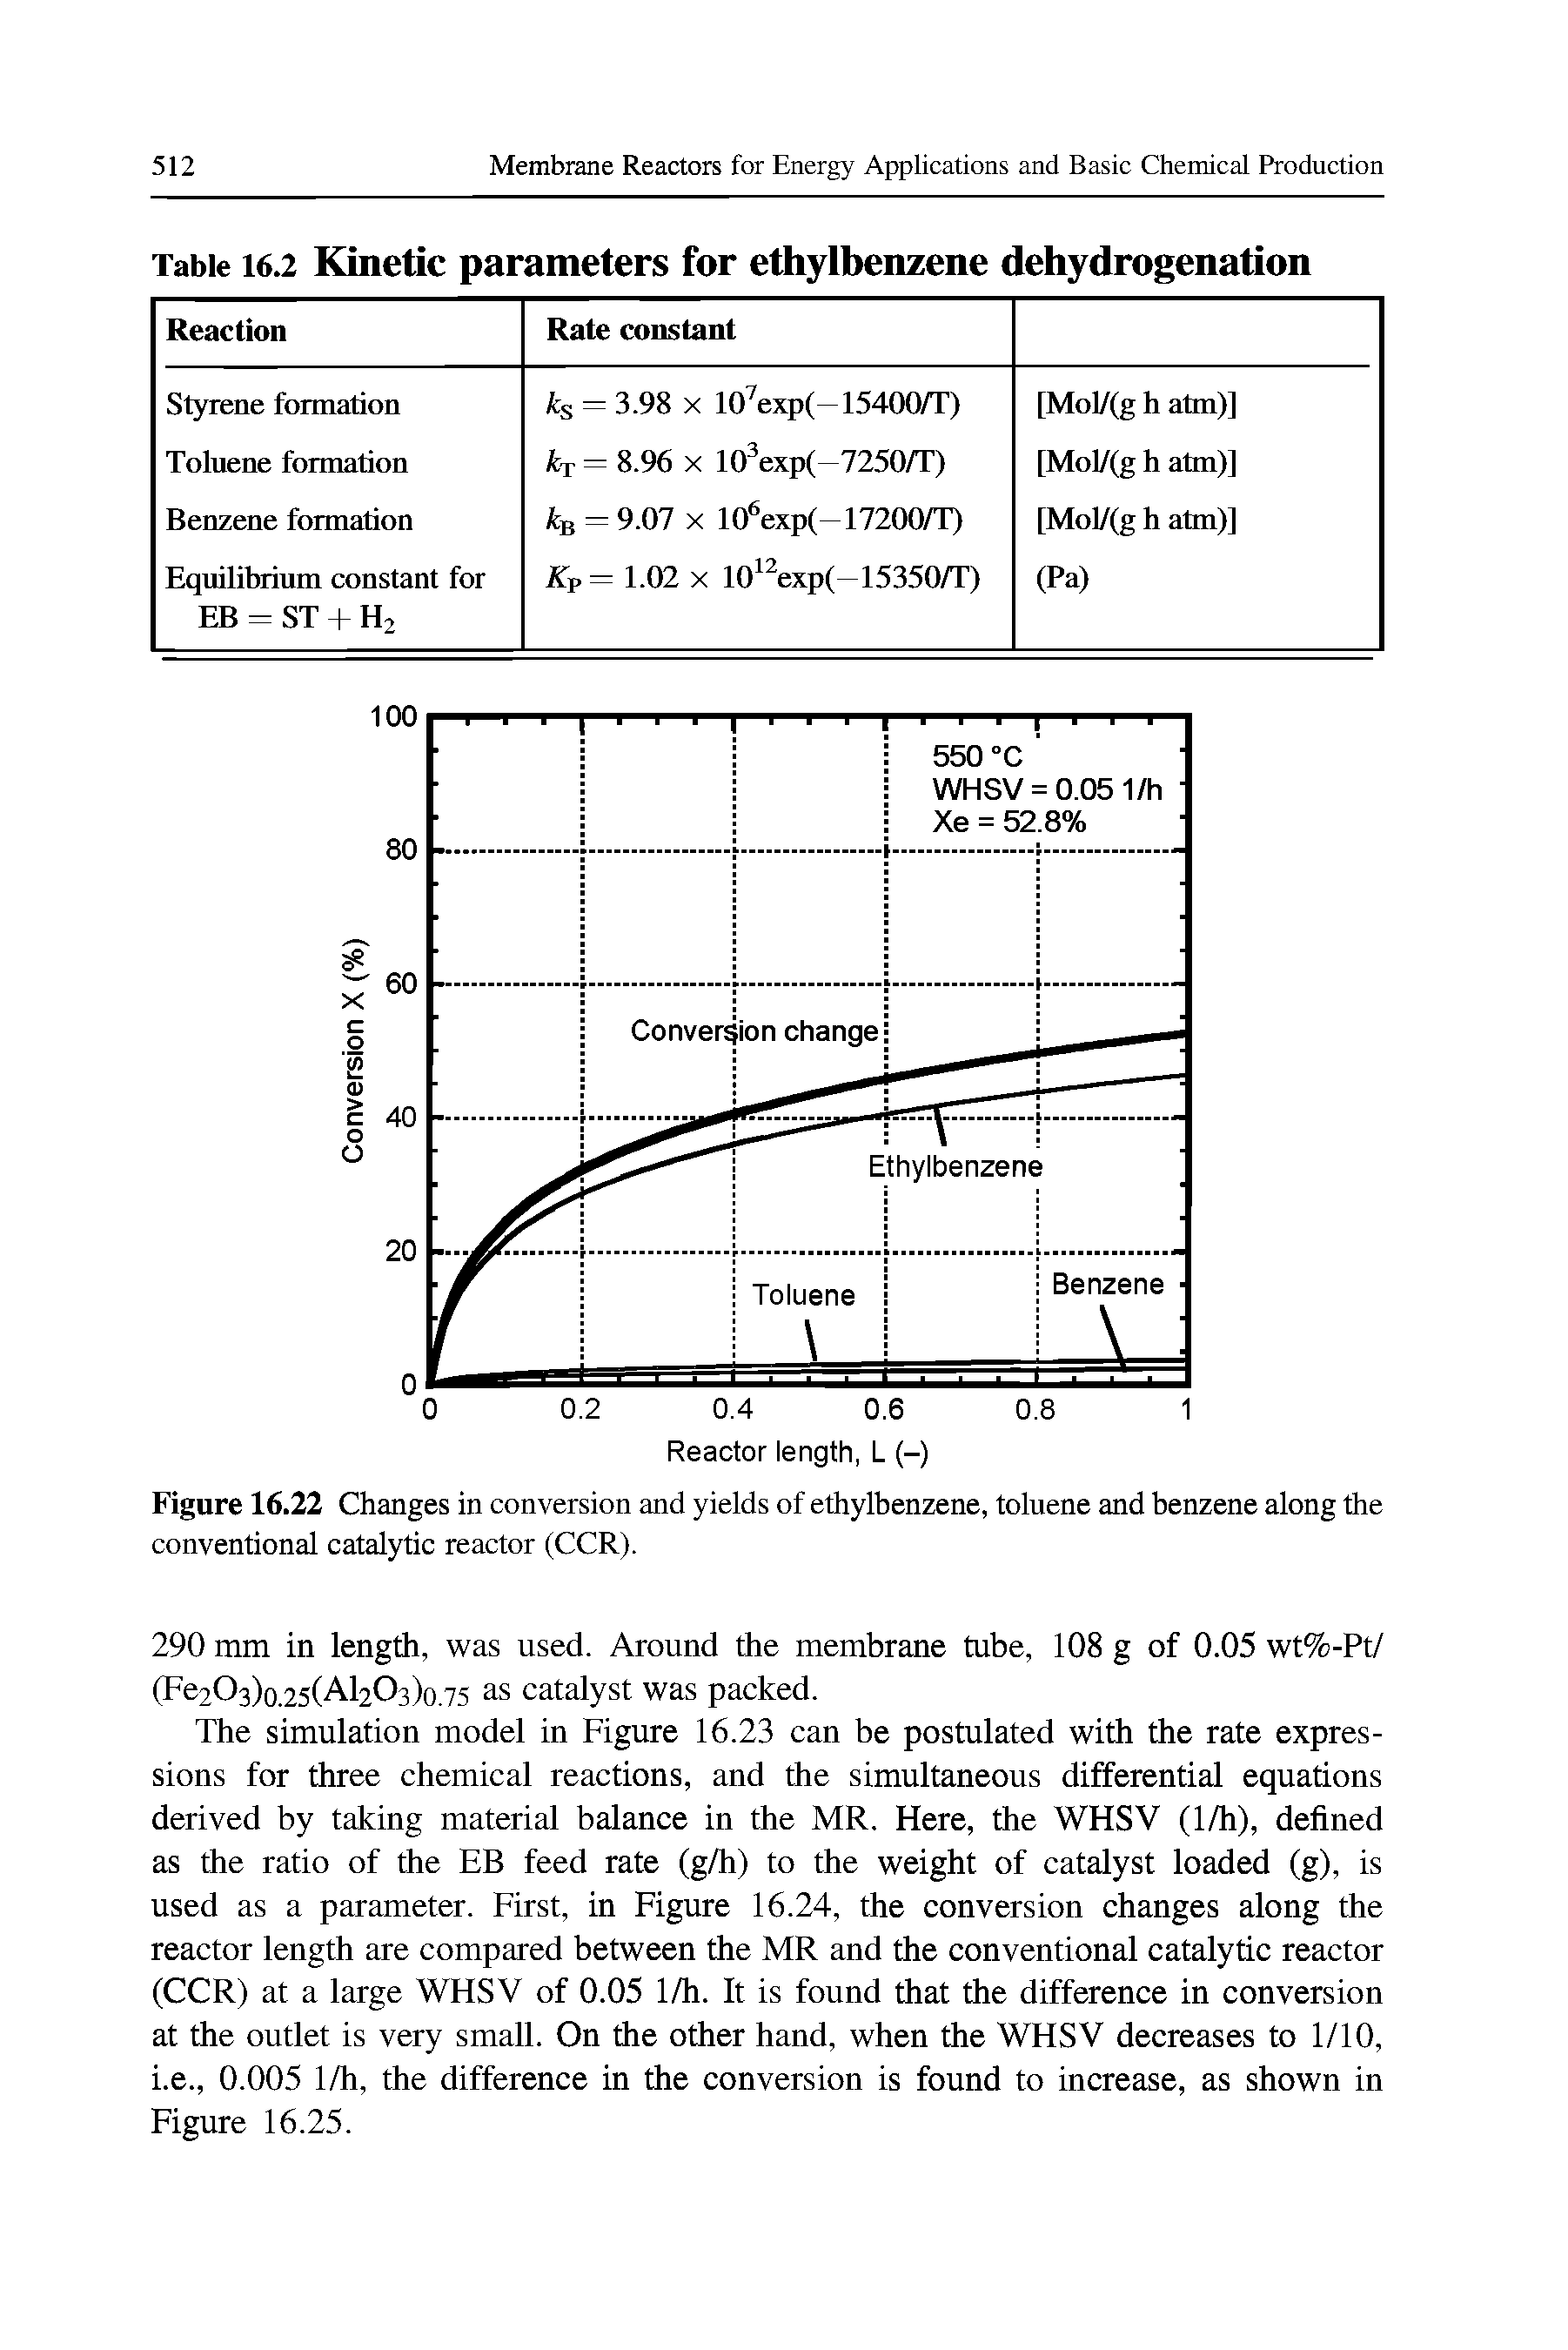 Figure 16.22 Changes in conversion and yields of ethylbenzene, toluene and benzene along the conventional catalytic reactor (CCR).